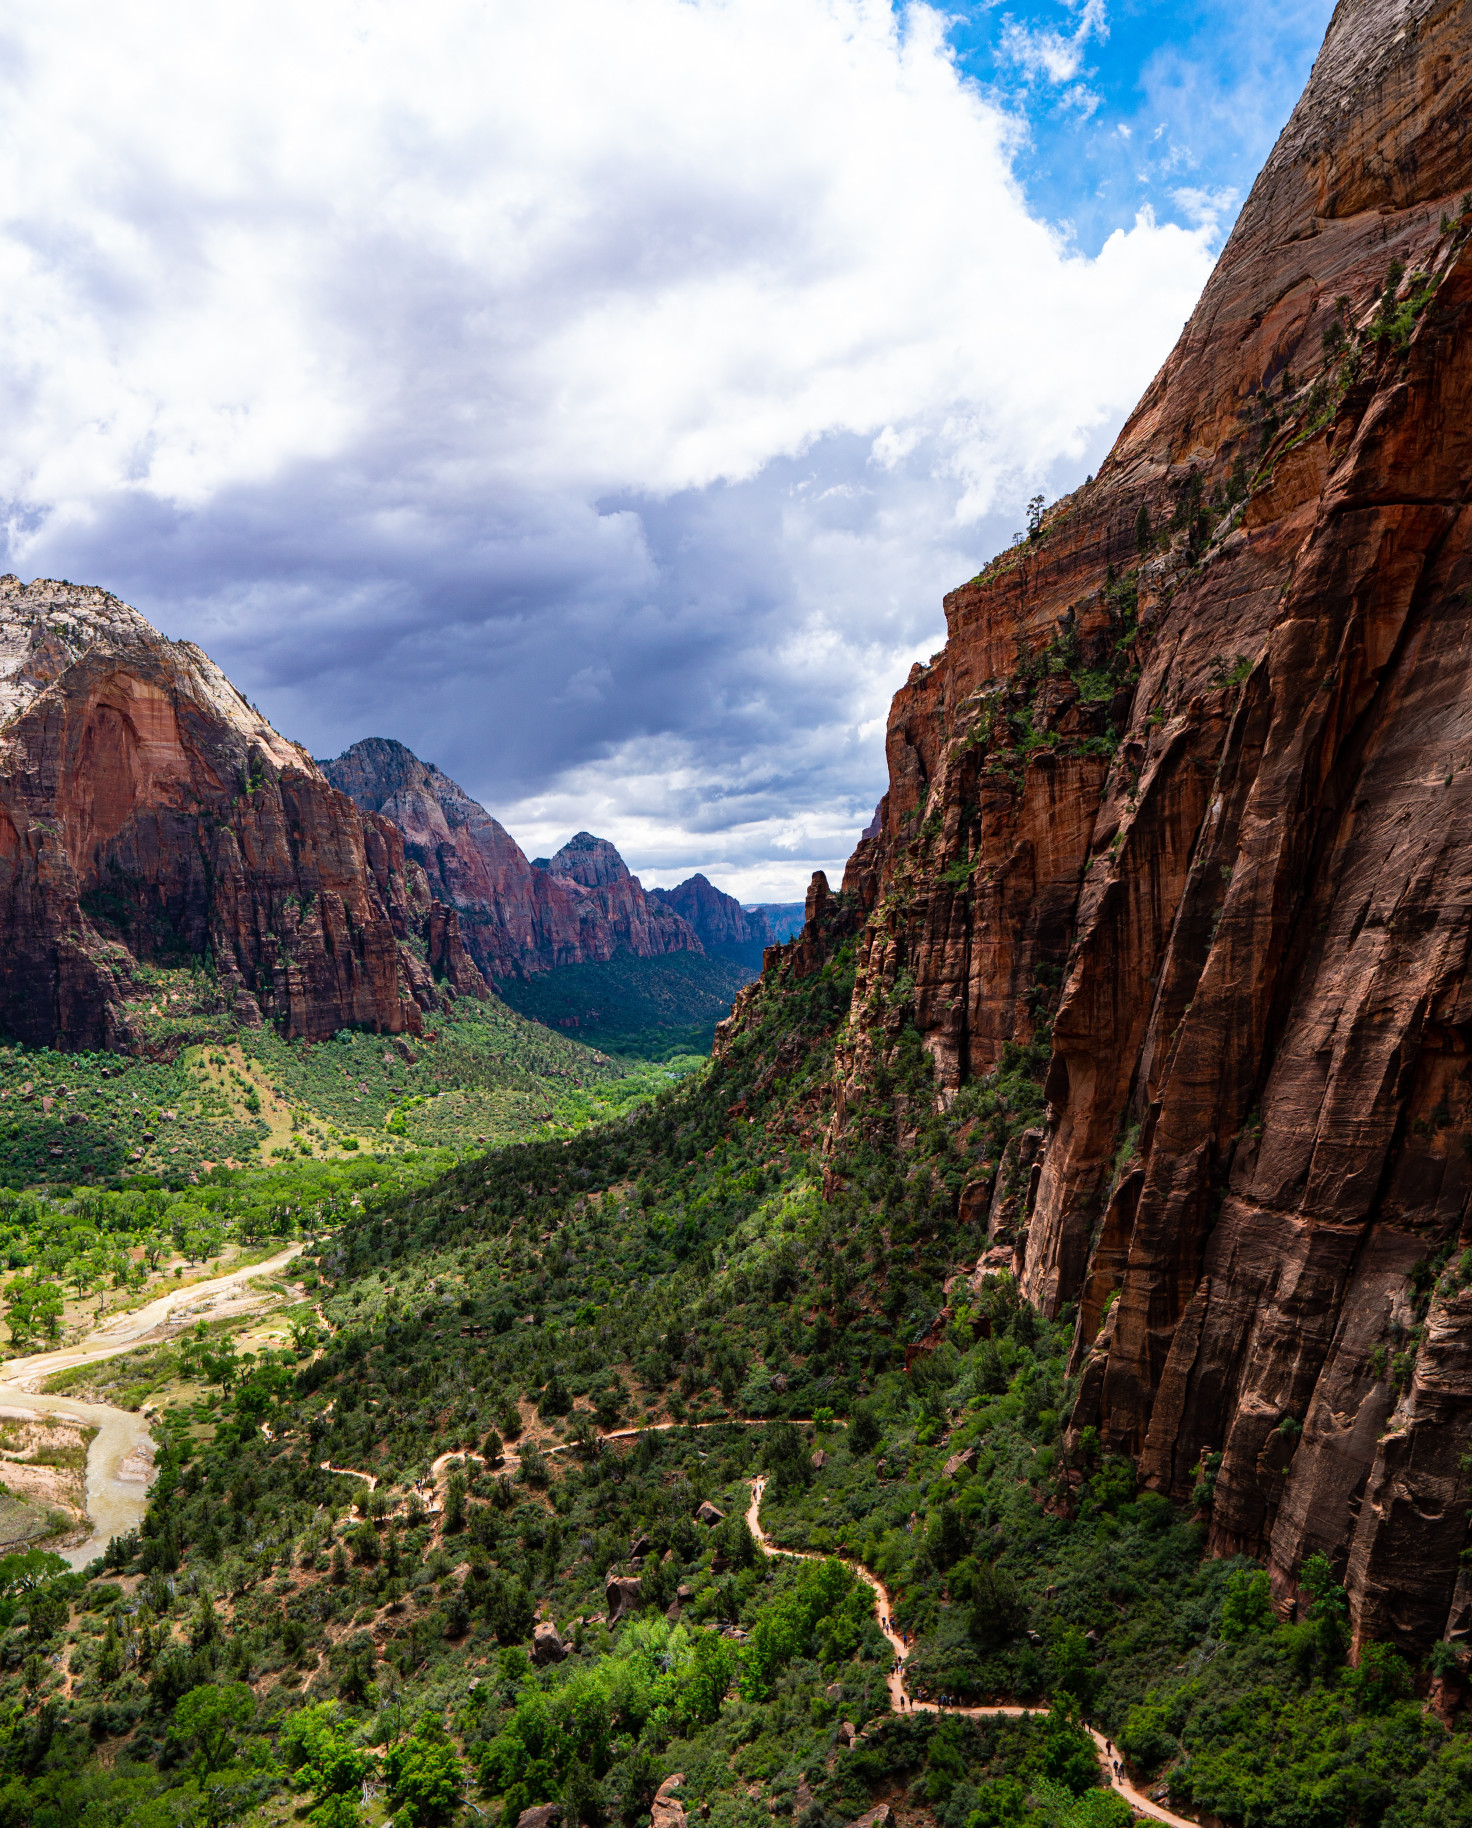  View of a trail and the road in Zion National Park